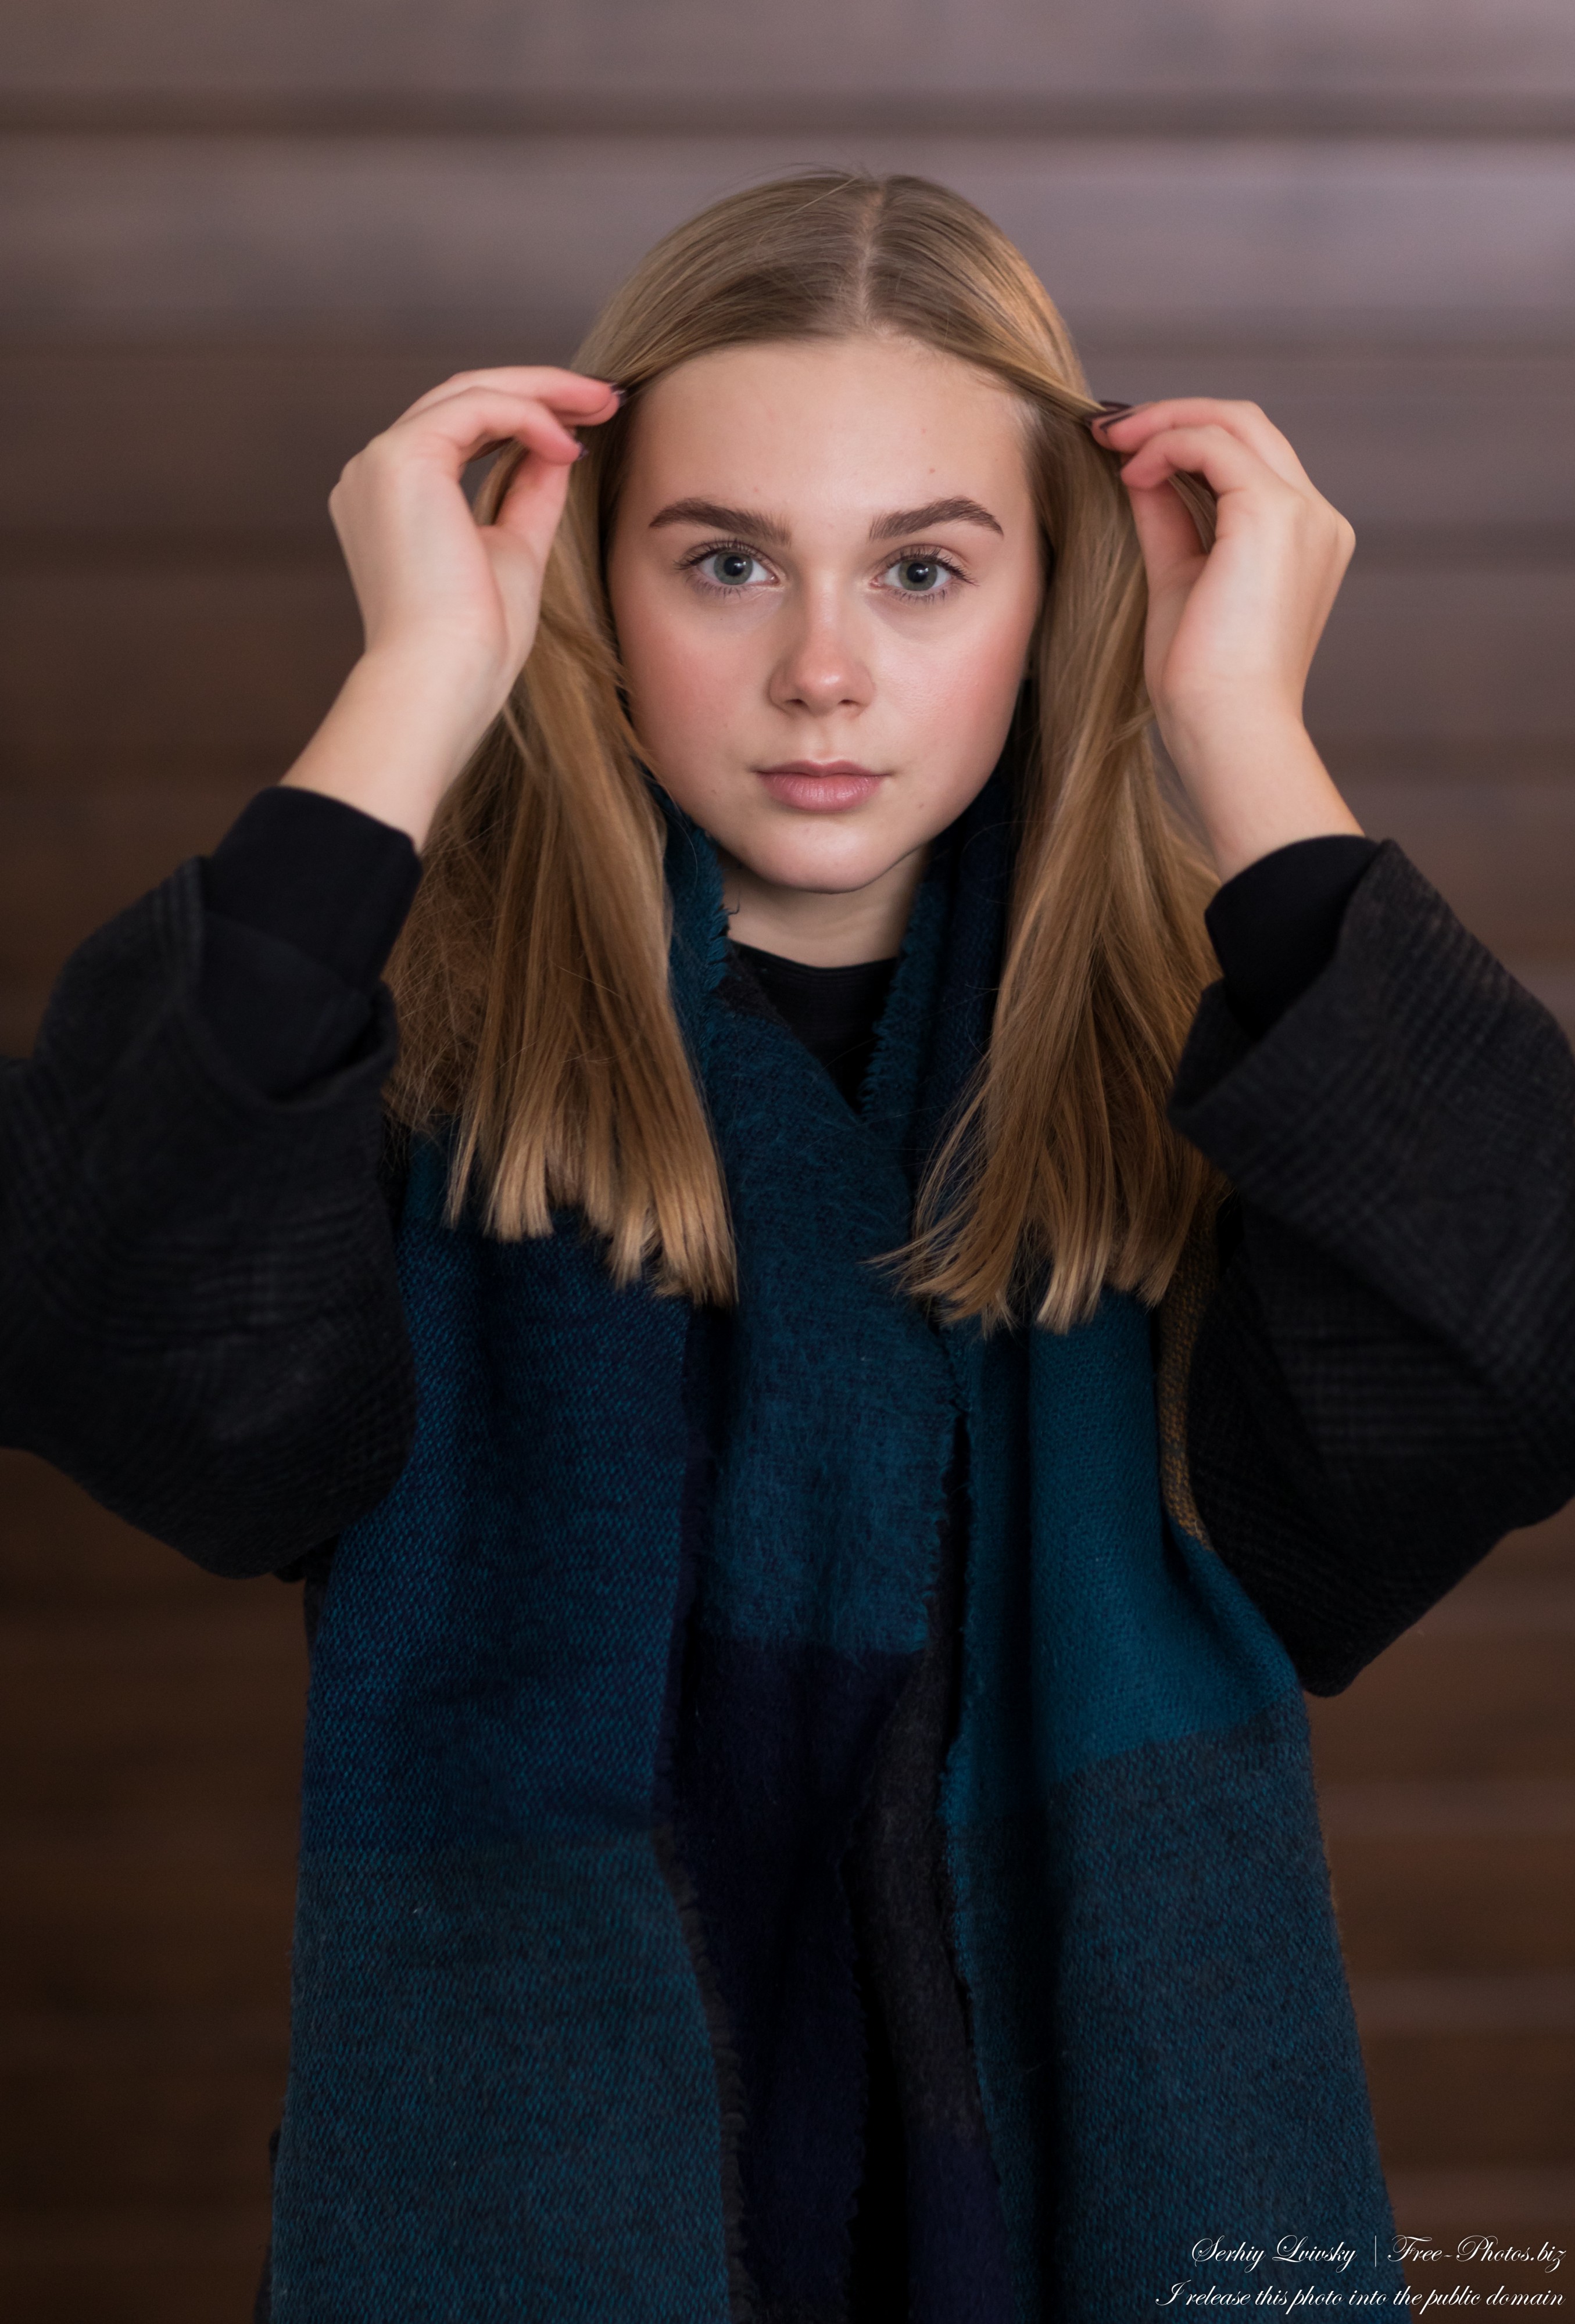 Emilia - a 15-year-old natural blonde Catholic girl photographed in November 2020 by Serhiy Lvivsky, picture 16